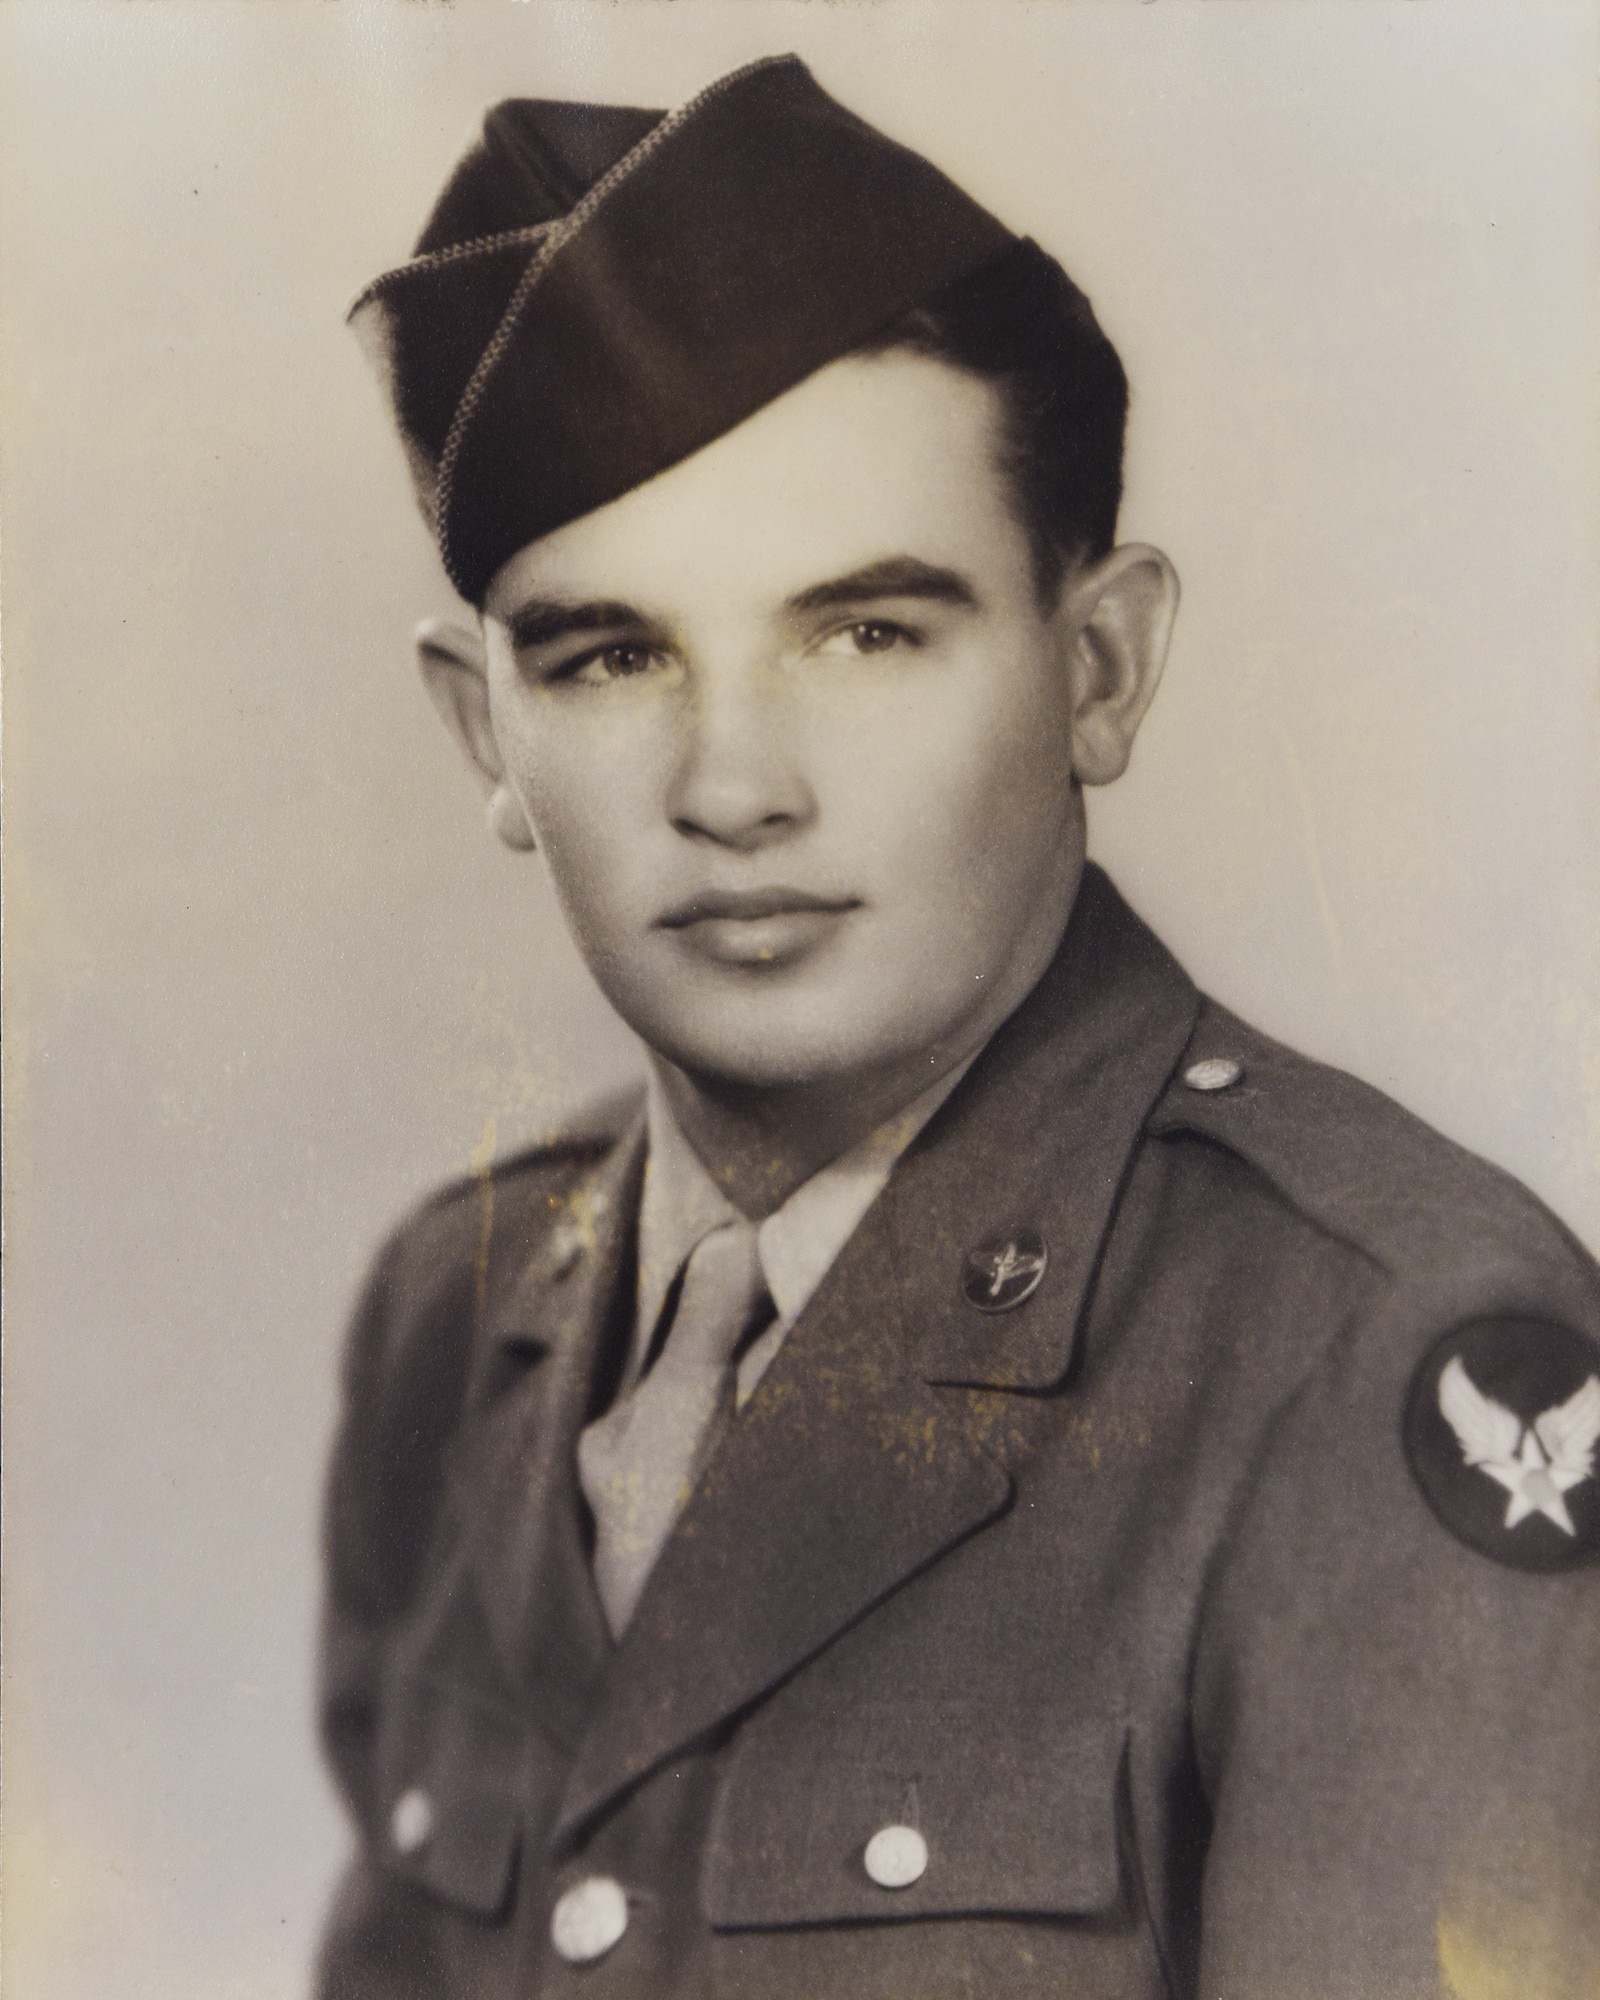 A picture of the late John Cockerham, a local Word War II veteran, when he was in the Army Air Corps. Cockerham grew up in Hamilton and worked as an aircraft sheet-metal worker on Columbus Army Air Field, Mississippi, (now Columbus Air Force Base) from 1942-1943. After enlisting in the Army Air Corps, he was assigned to the 100th Bombardment Group as a B-17 Flying Fortress gunner in the Army Air Corps. (Courtesy photo)